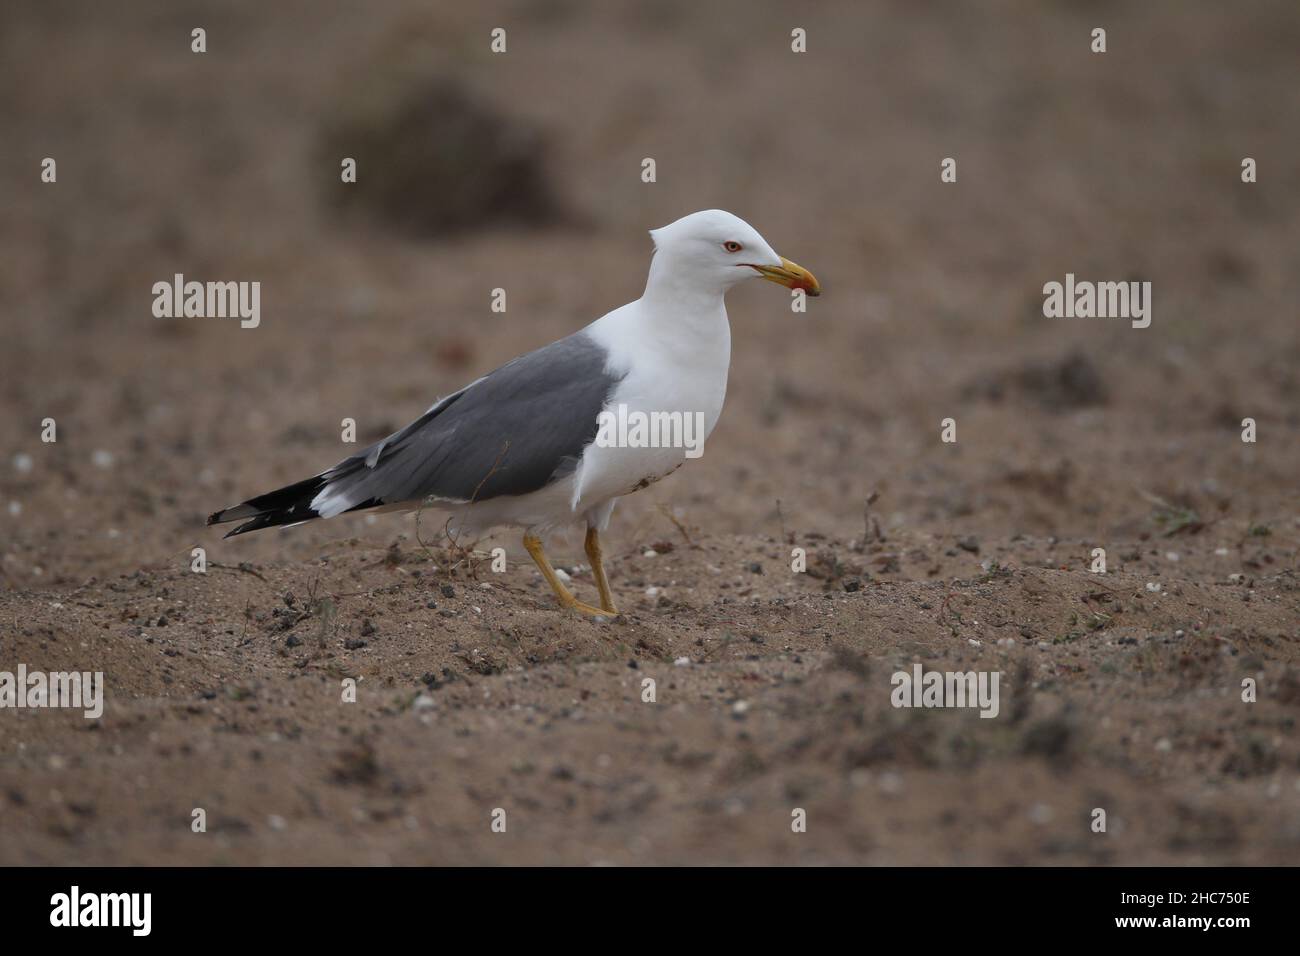 Yellow legged gulls on Lanzarote are often found in large numbers on the farmed desert soils searching for invertebrate prey. Stock Photo